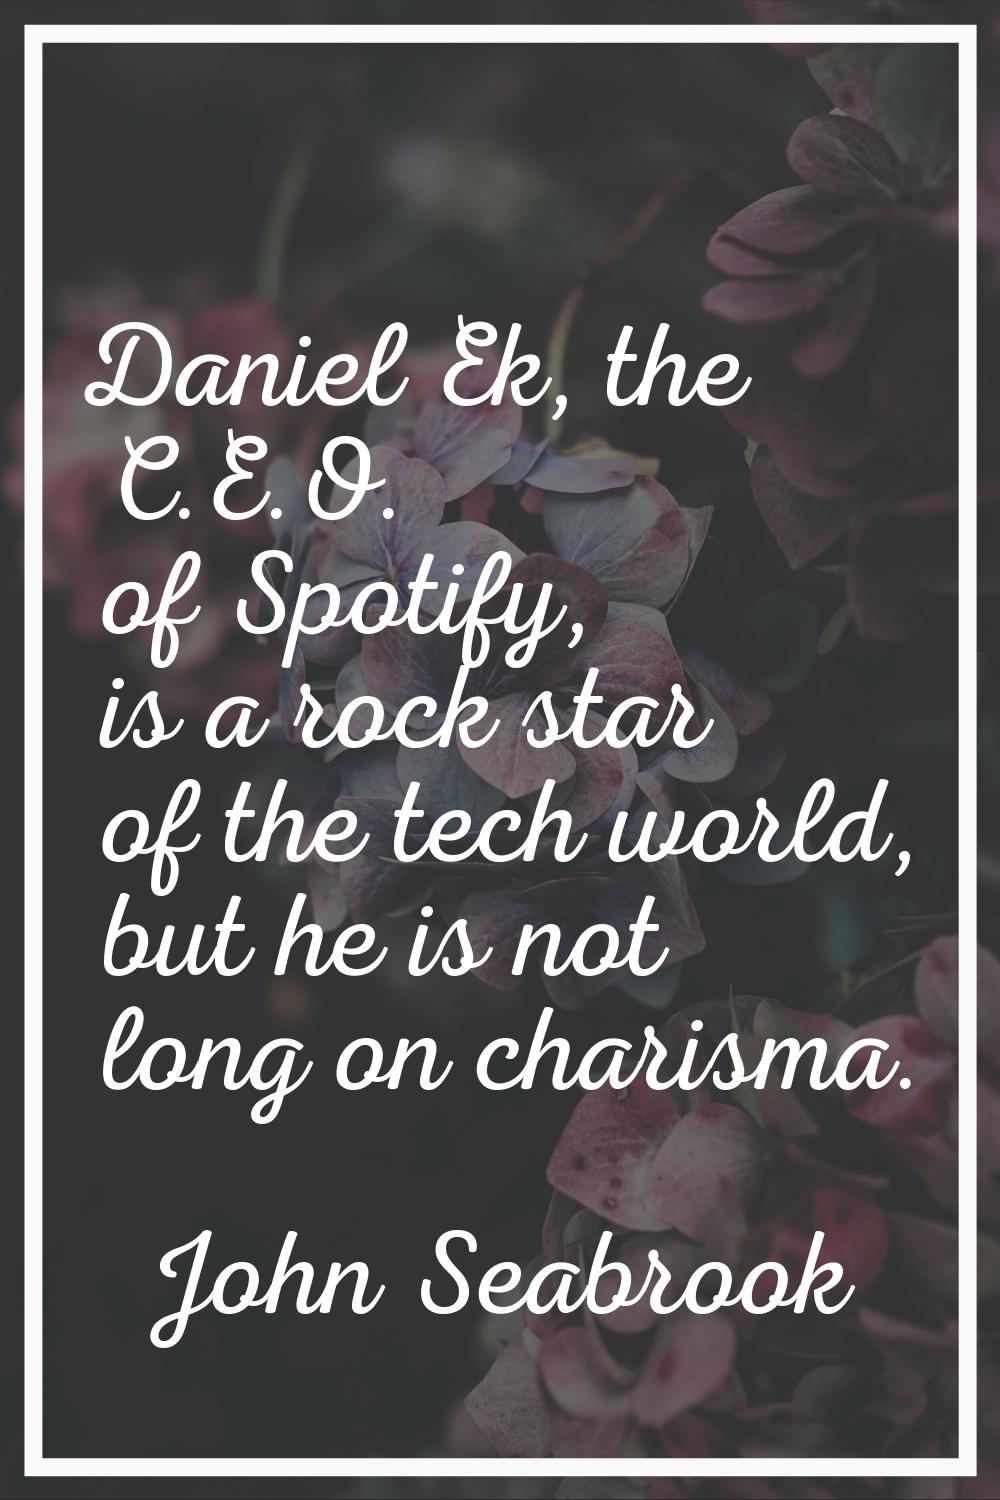 Daniel Ek, the C.E.O. of Spotify, is a rock star of the tech world, but he is not long on charisma.